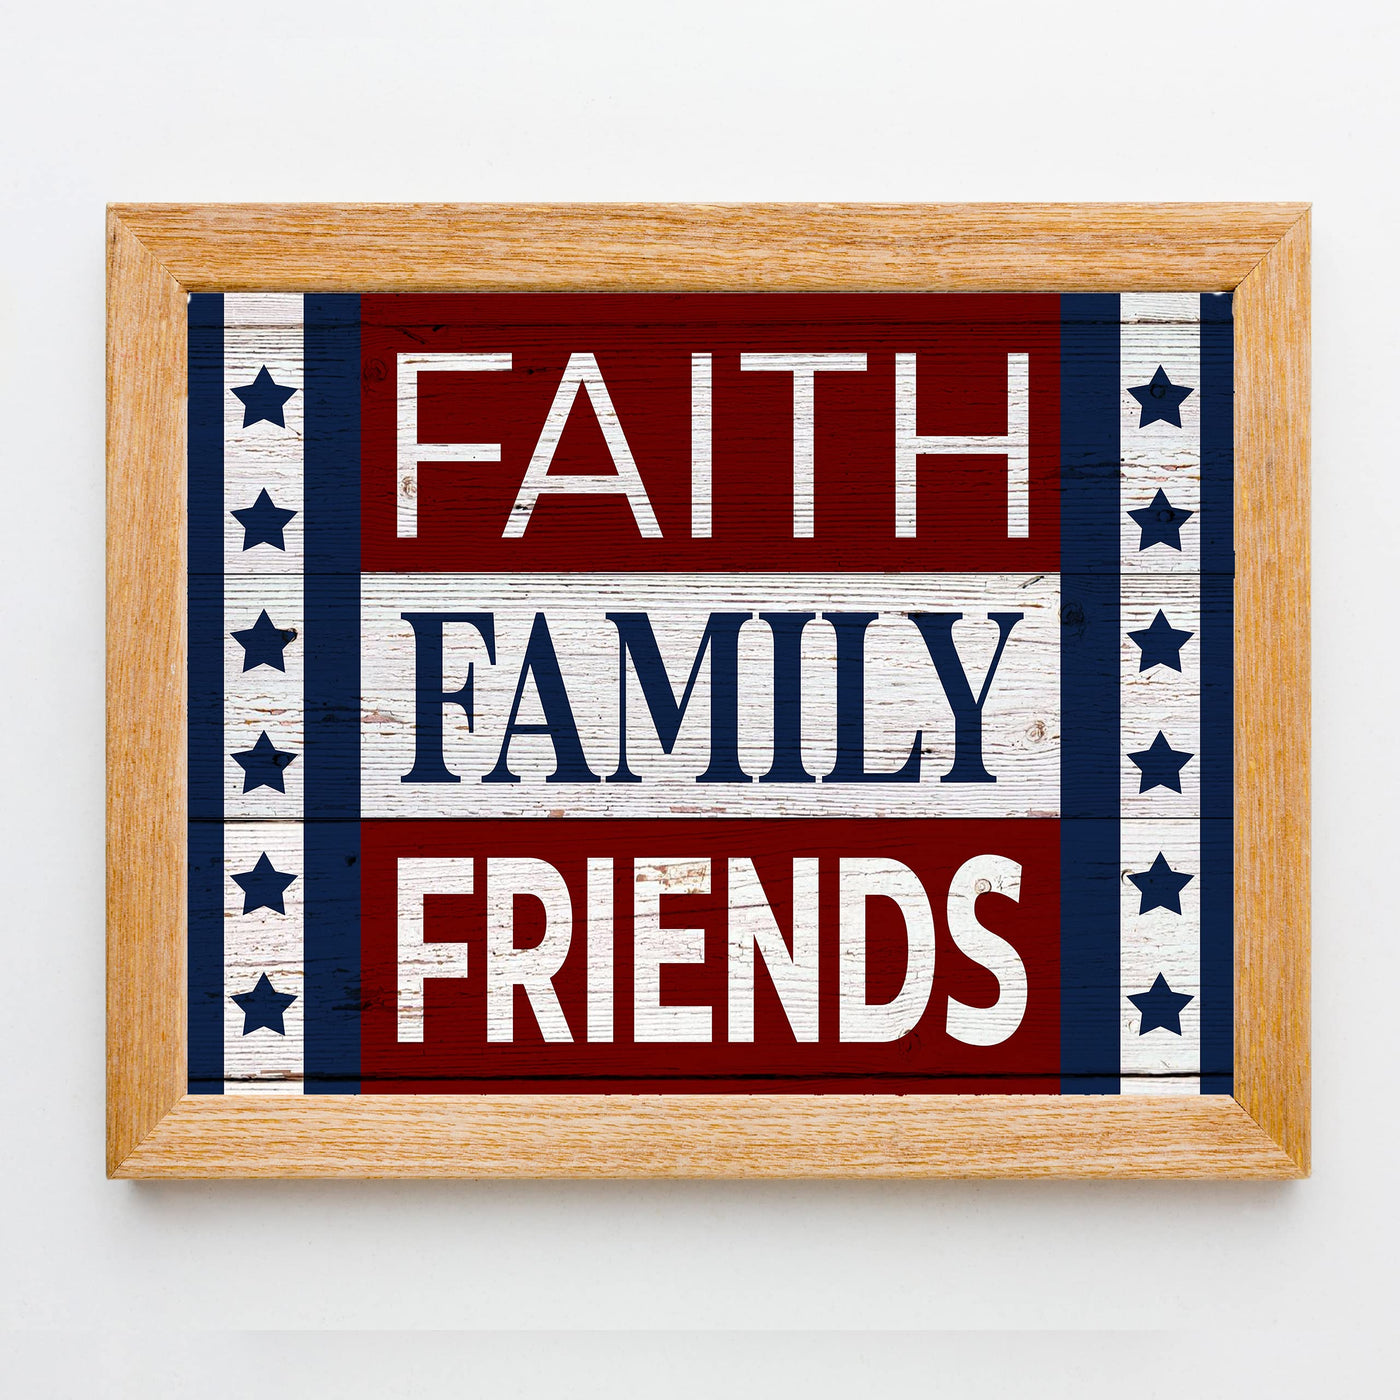 Faith-Family-Friends-Patriotic American Flag Print-14x11" Motivational Farmhouse Poster Print-Ready to Frame. Inspirational Home-Office-Christian-Welcome Decor. Great Gift! Printed on Photo Paper.